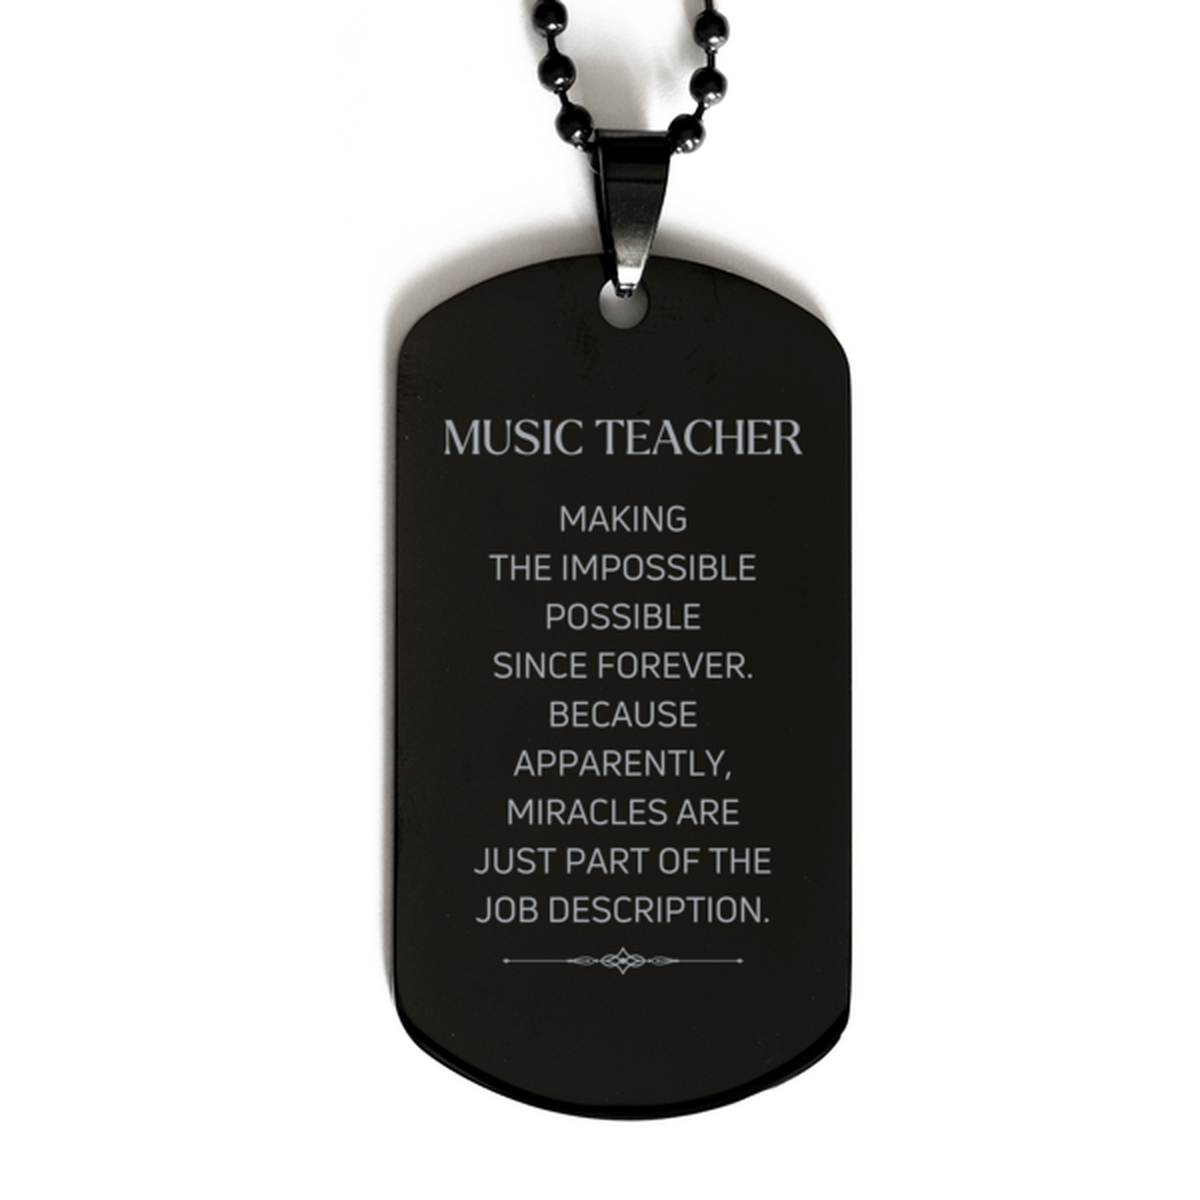 Funny Music Teacher Gifts, Miracles are just part of the job description, Inspirational Birthday Black Dog Tag For Music Teacher, Men, Women, Coworkers, Friends, Boss